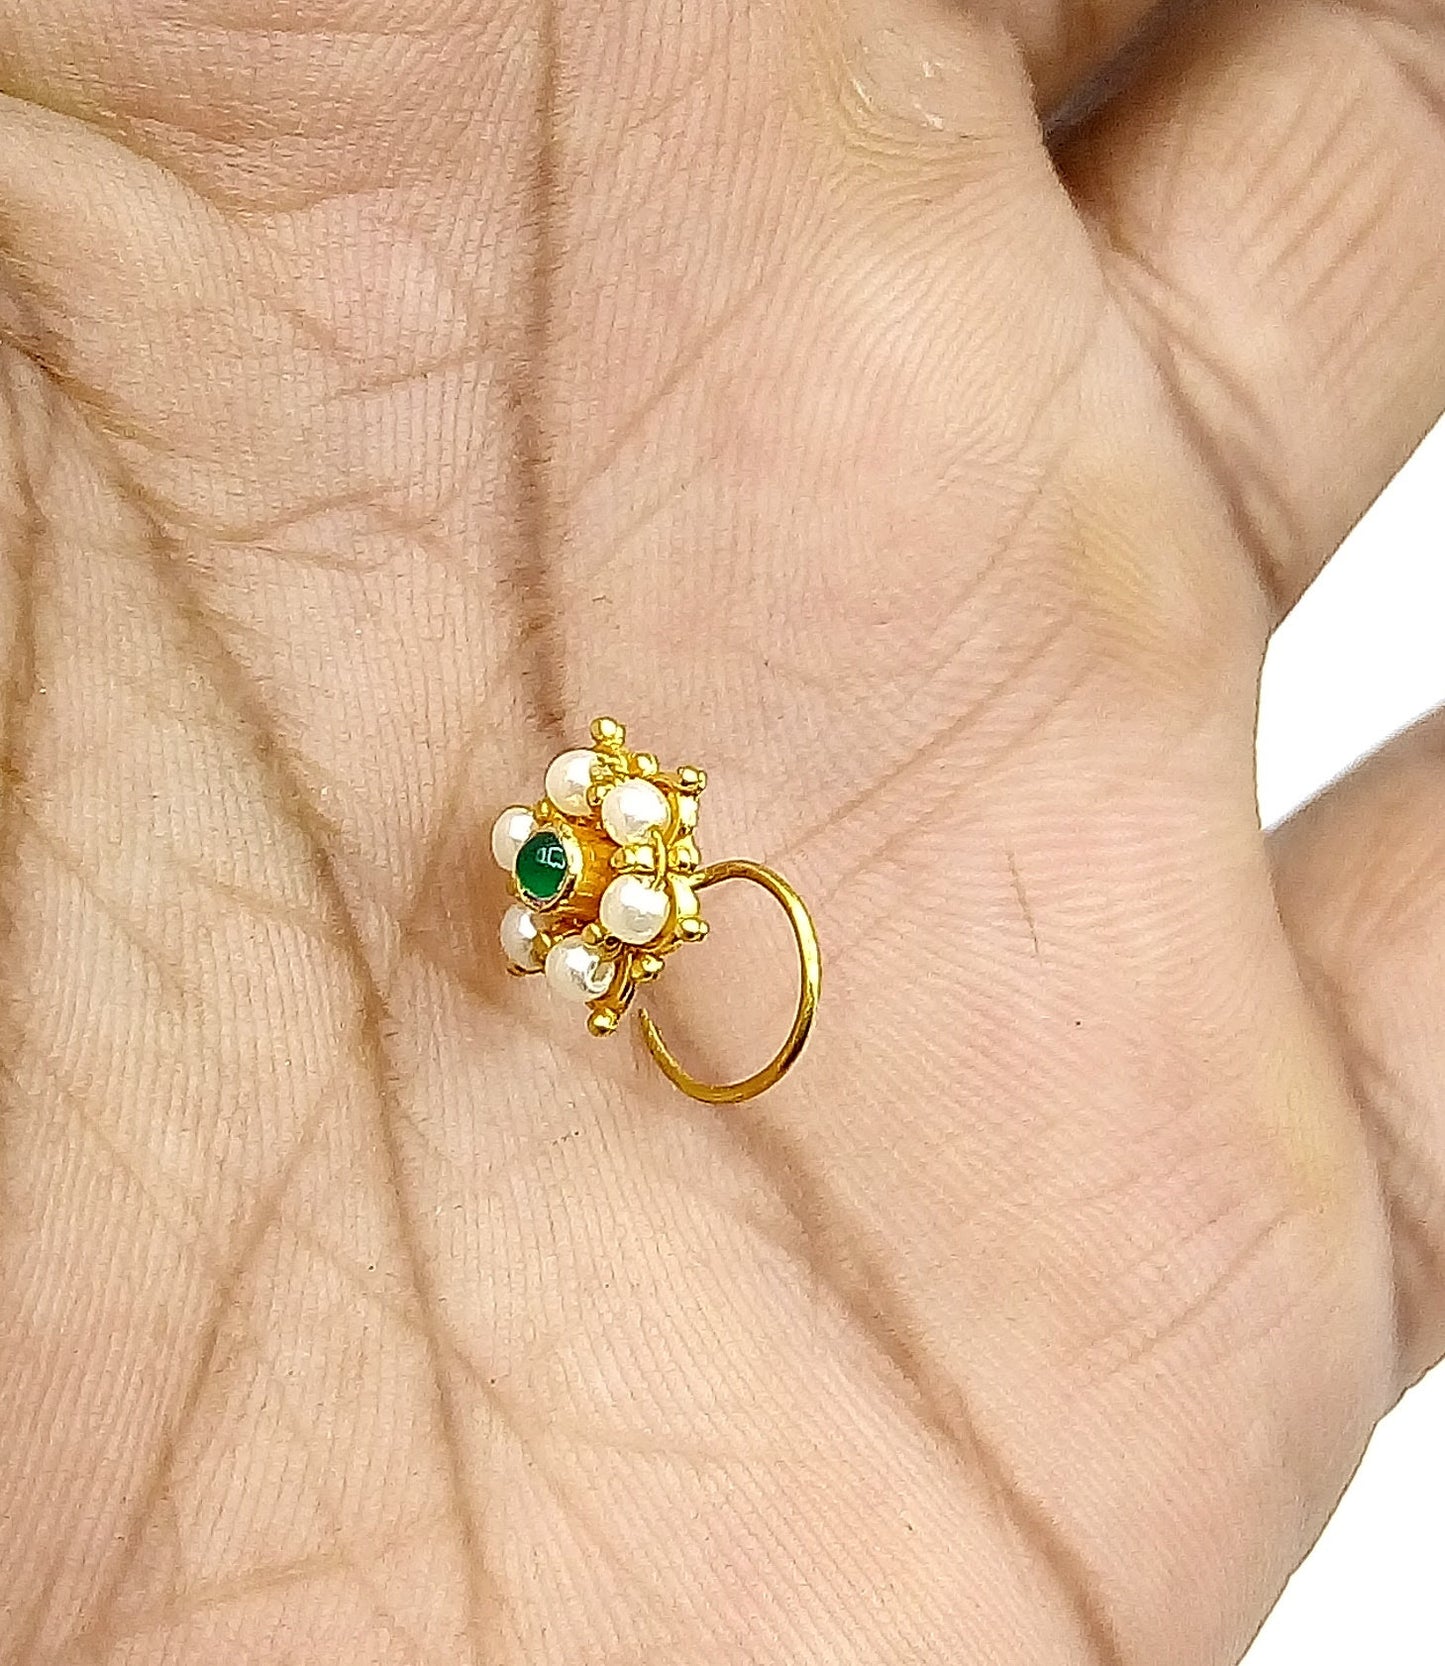 20k yellow gold handmade fabulous green stone pearl nose pin excellent antique vintage design tribal jewelry gnp20 - TRIBAL ORNAMENTS